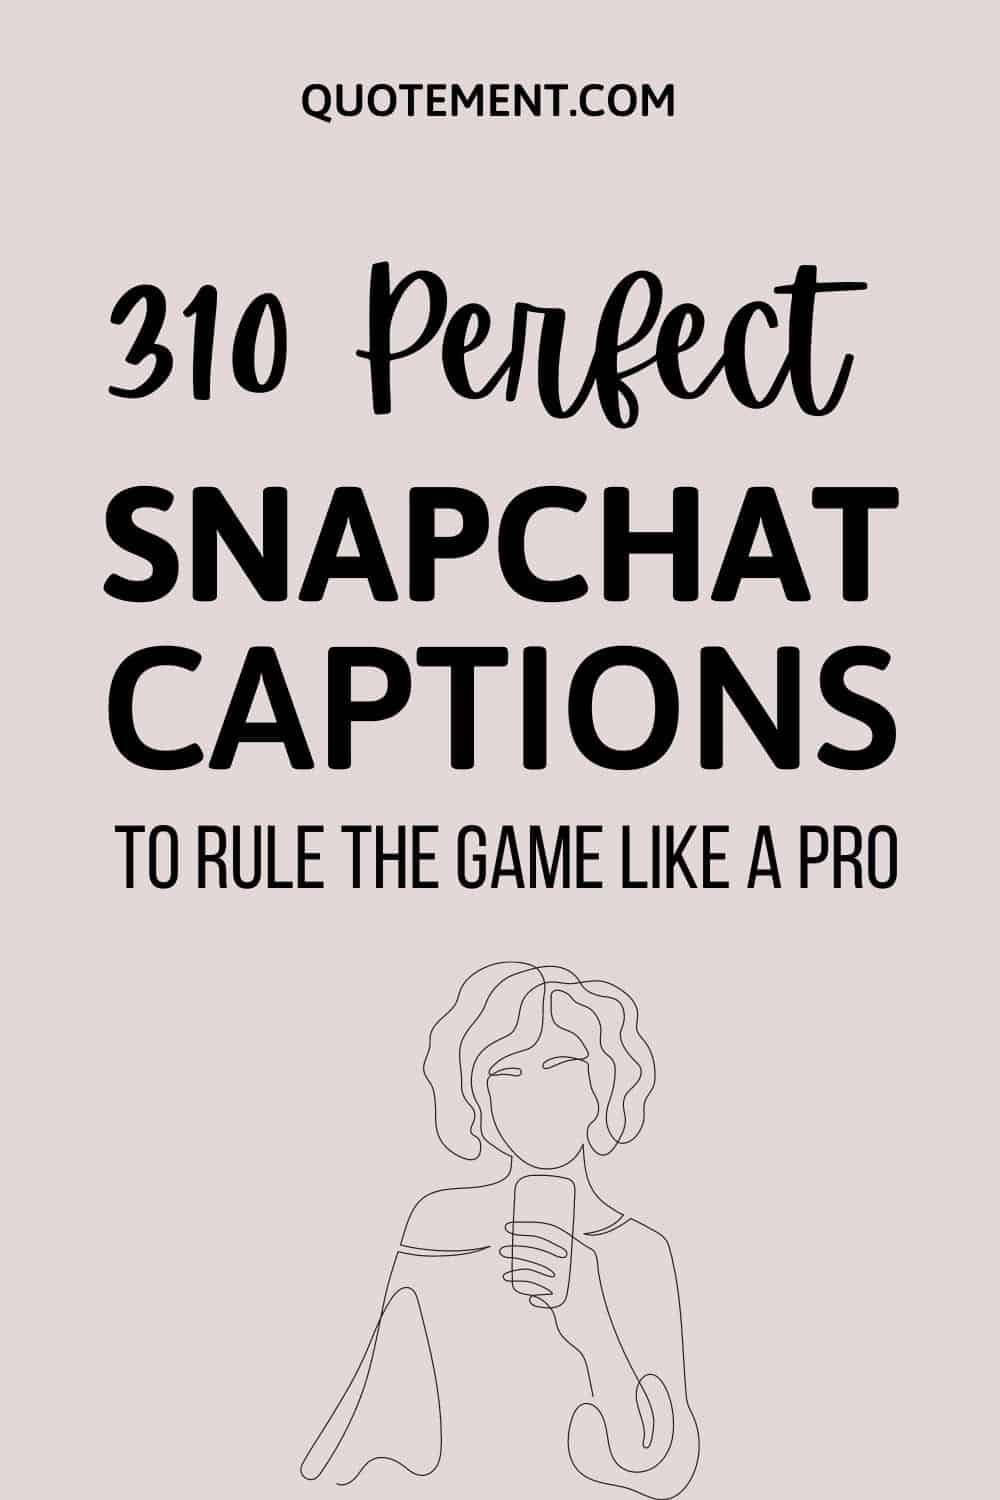 310 Perfect Snapchat Captions To Rule The Game Like A Pro